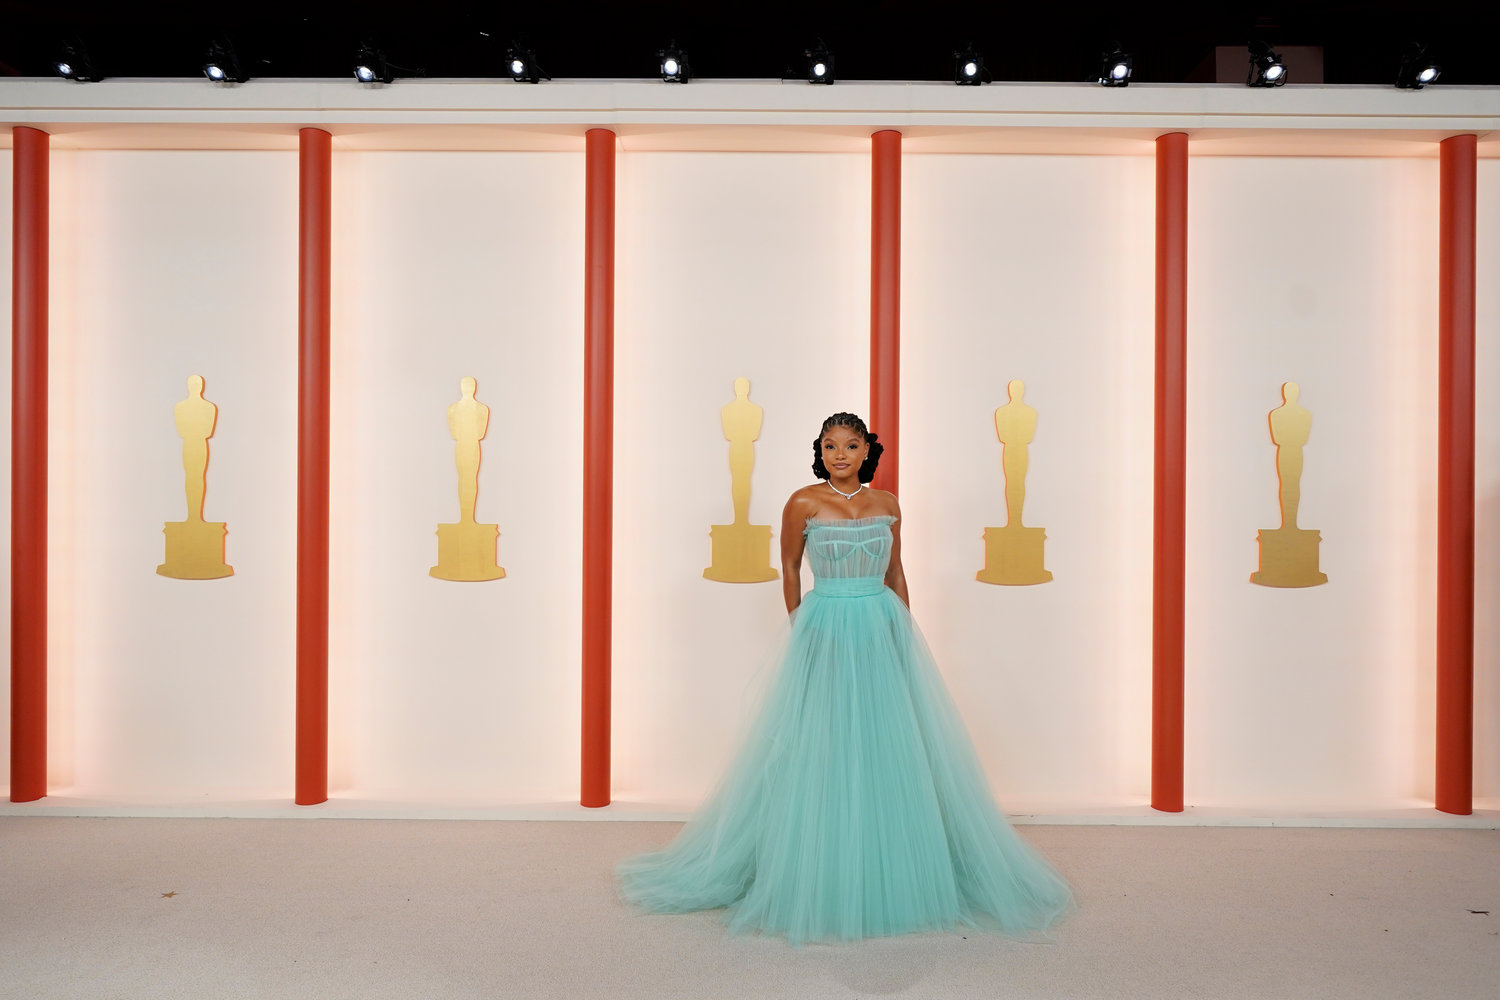 Halle Bailey arrives at the Oscars on Sunday, March 12, 2023, at the Dolby Theatre in Los Angeles. (AP Photo/Ashley Landis)